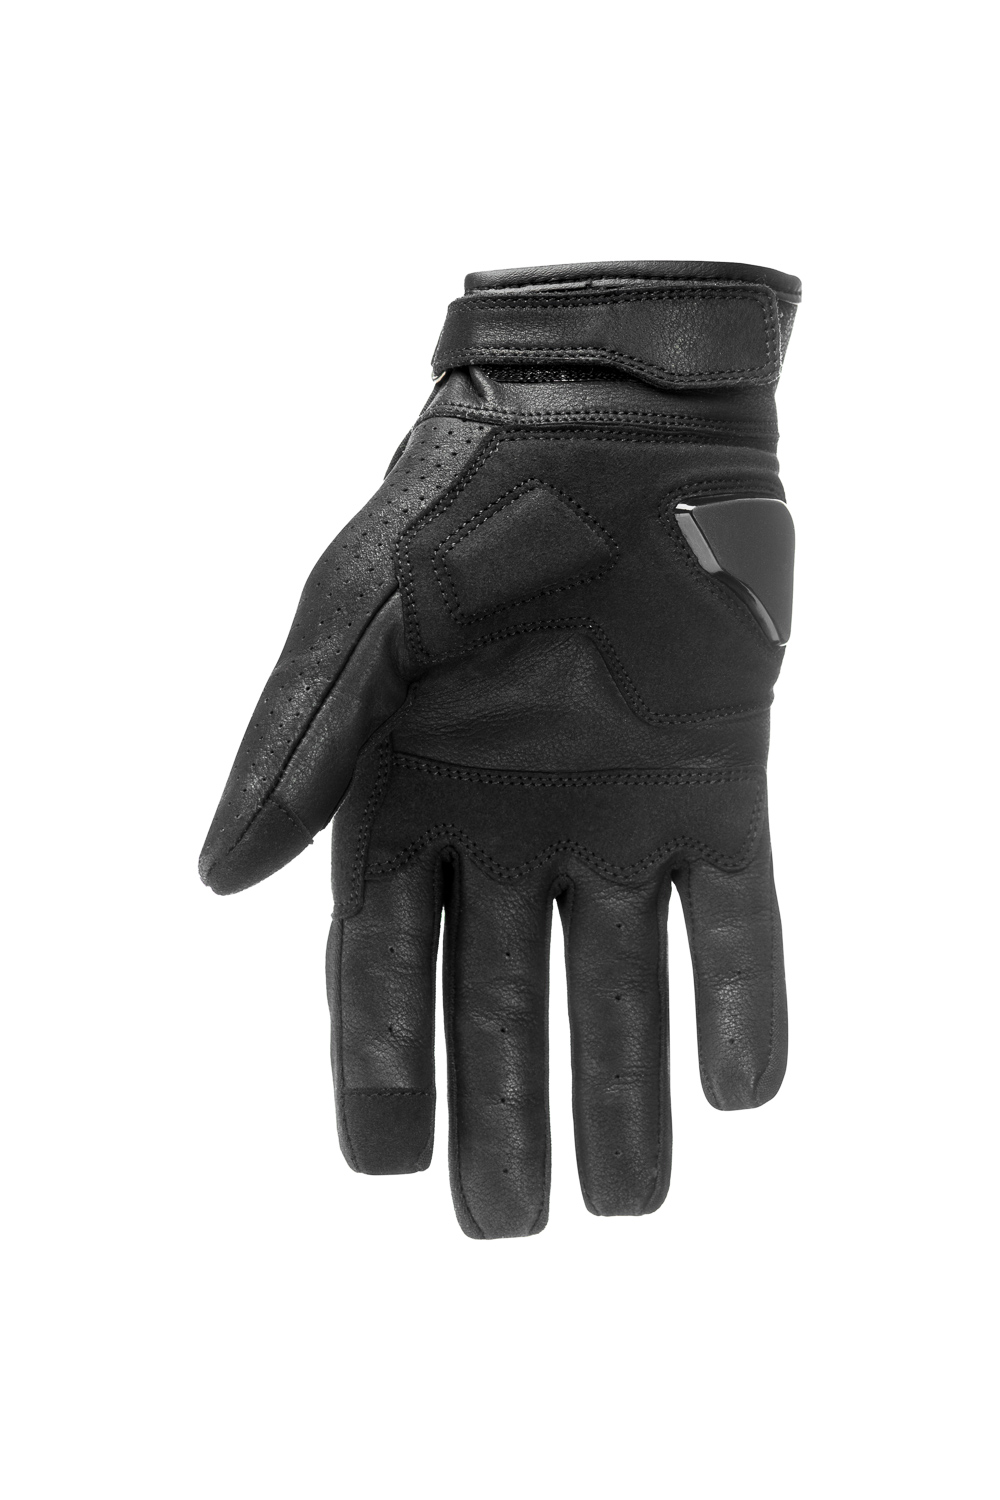 ONYX BLACK - Leather Motorcycle Gloves 3